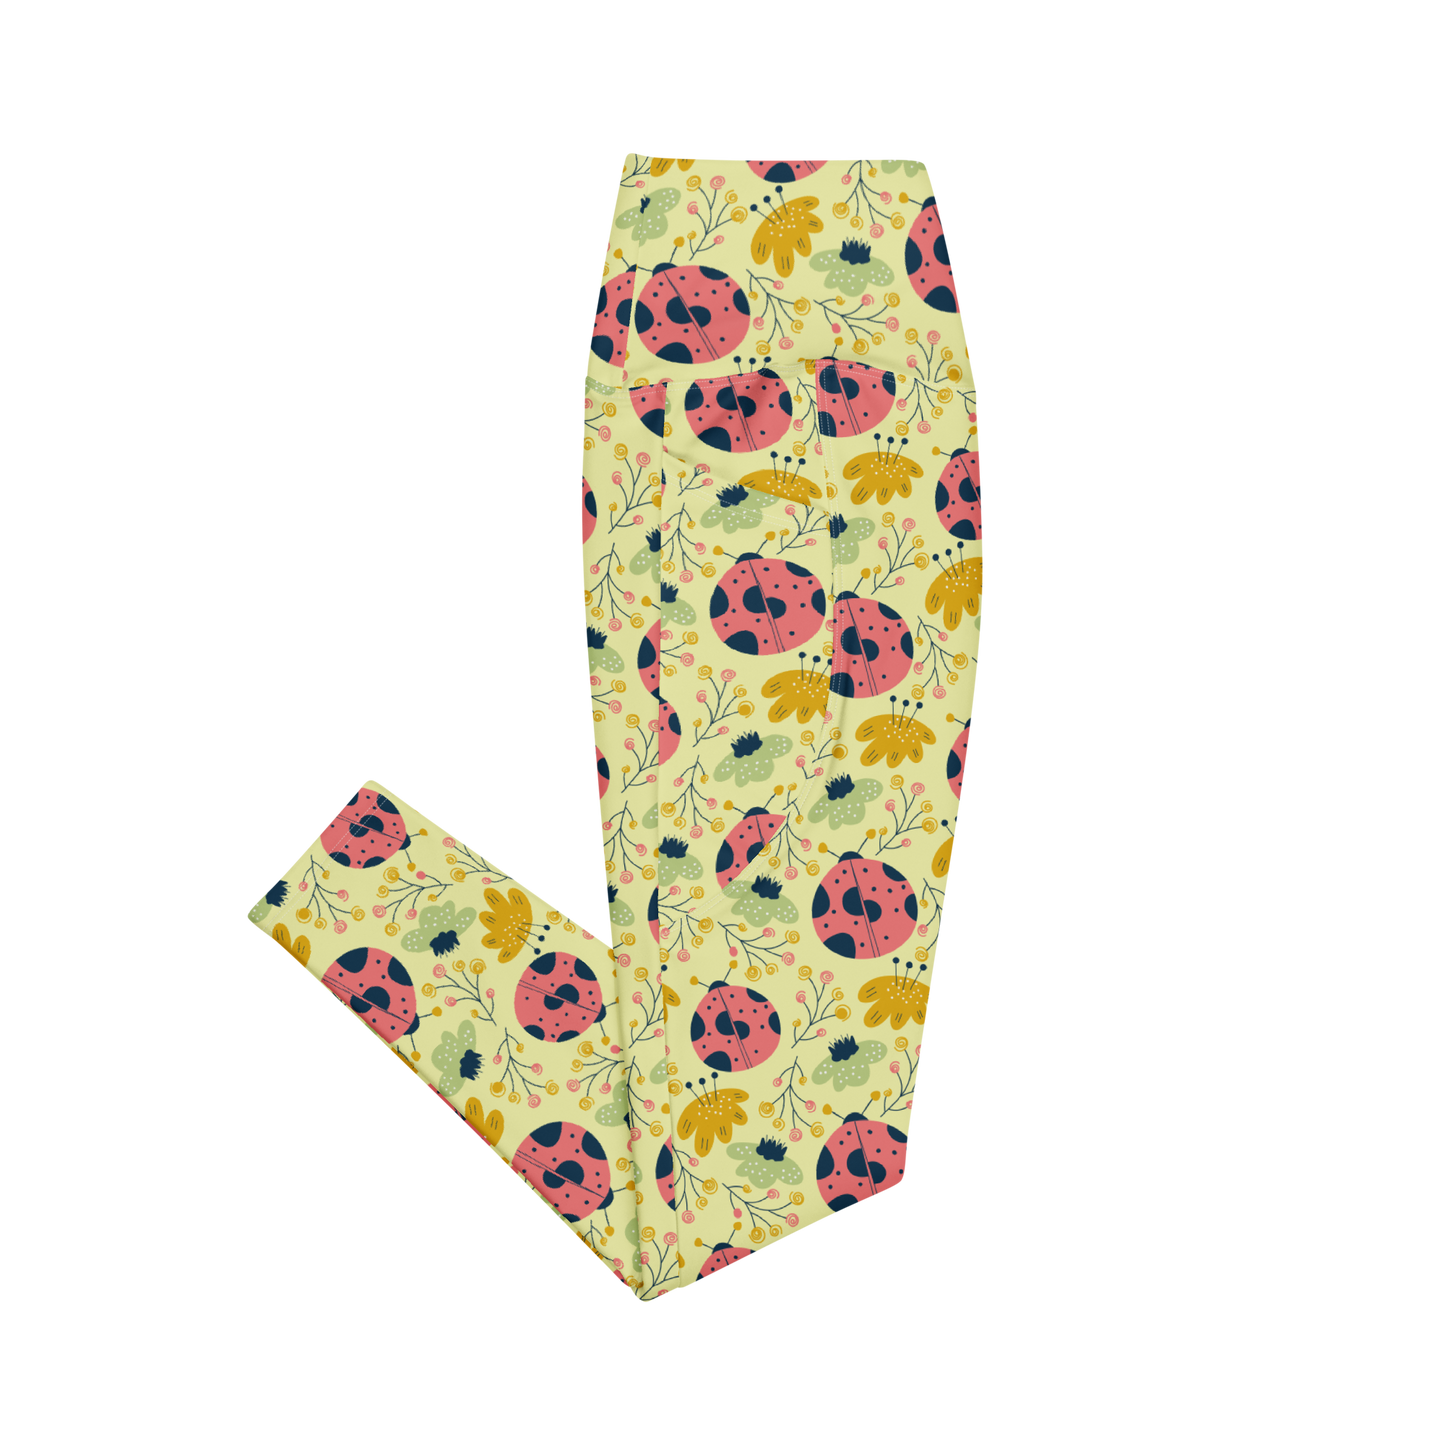 Scandinavian Spring Floral | Seamless Patterns | All-Over Print Leggings with Pockets - #9